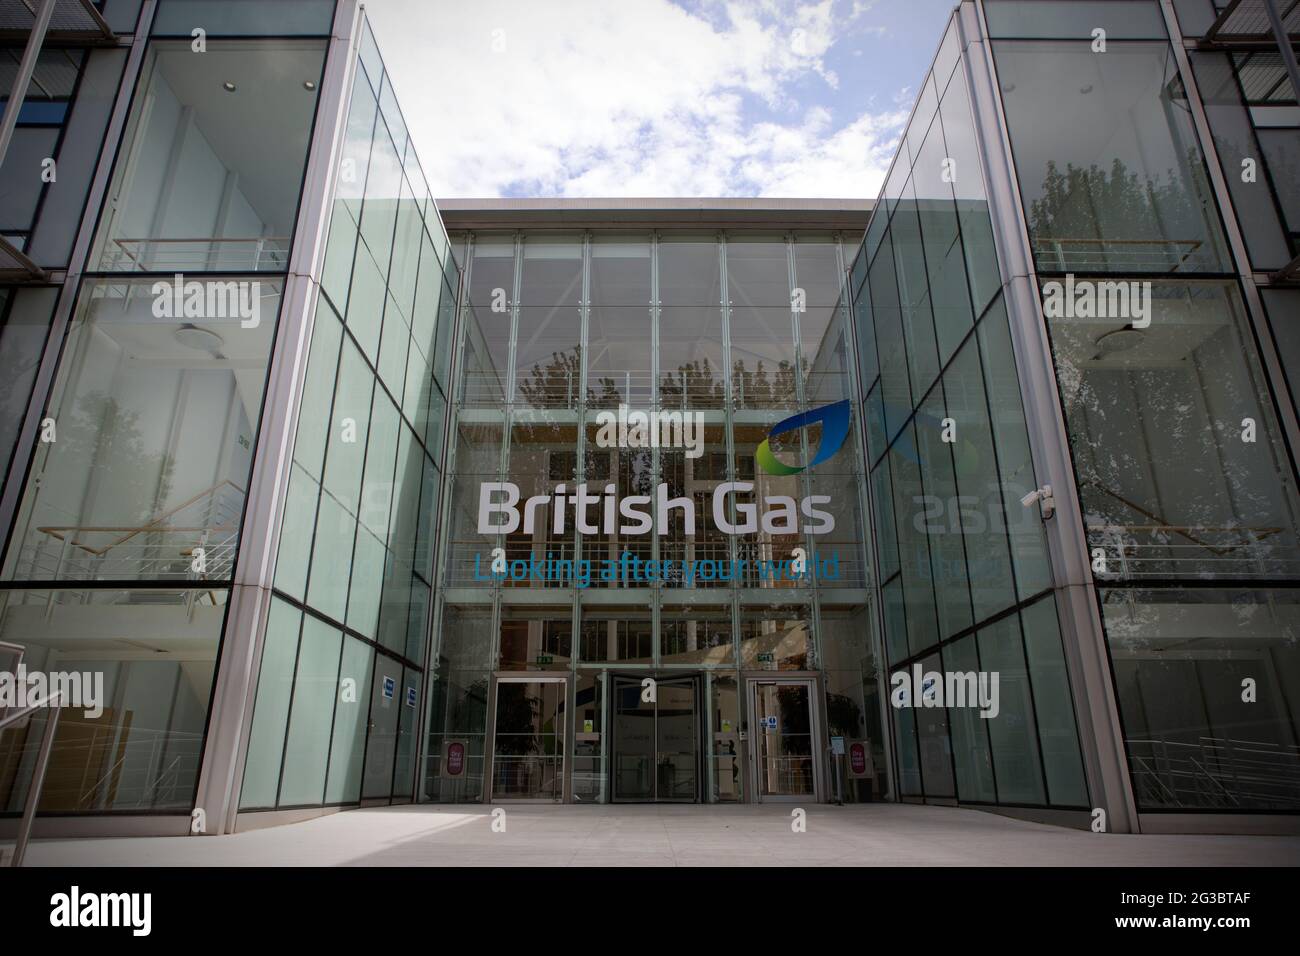 The offices of British Gas in Leeds. Leeds is a city centre which is still not returning to normal life post-lockdown with the footfall dramatically r Stock Photo